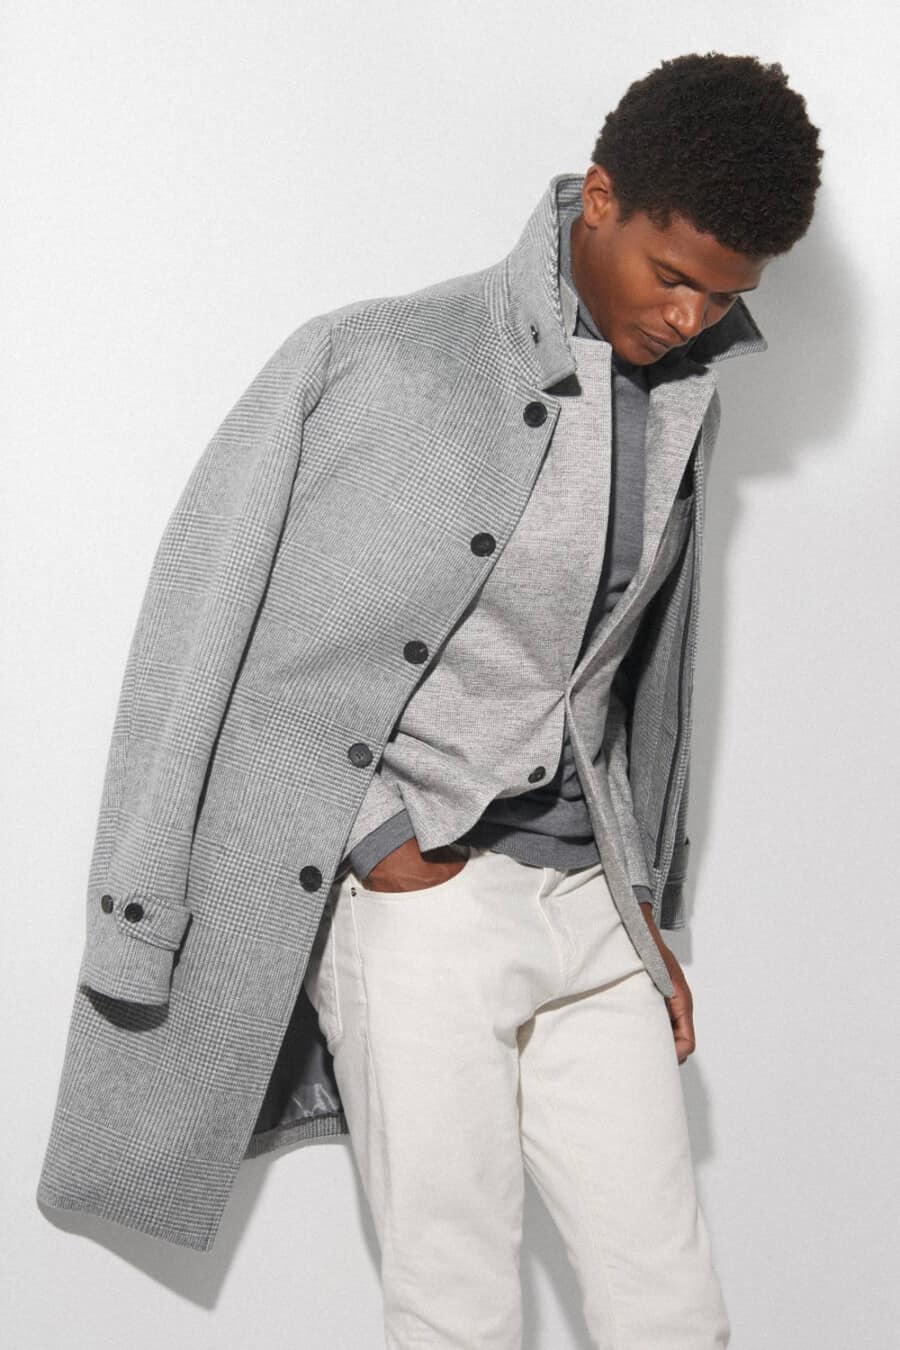 Men's white chinos, grey long sleeve top, grey blazer and grey overcoat outfit